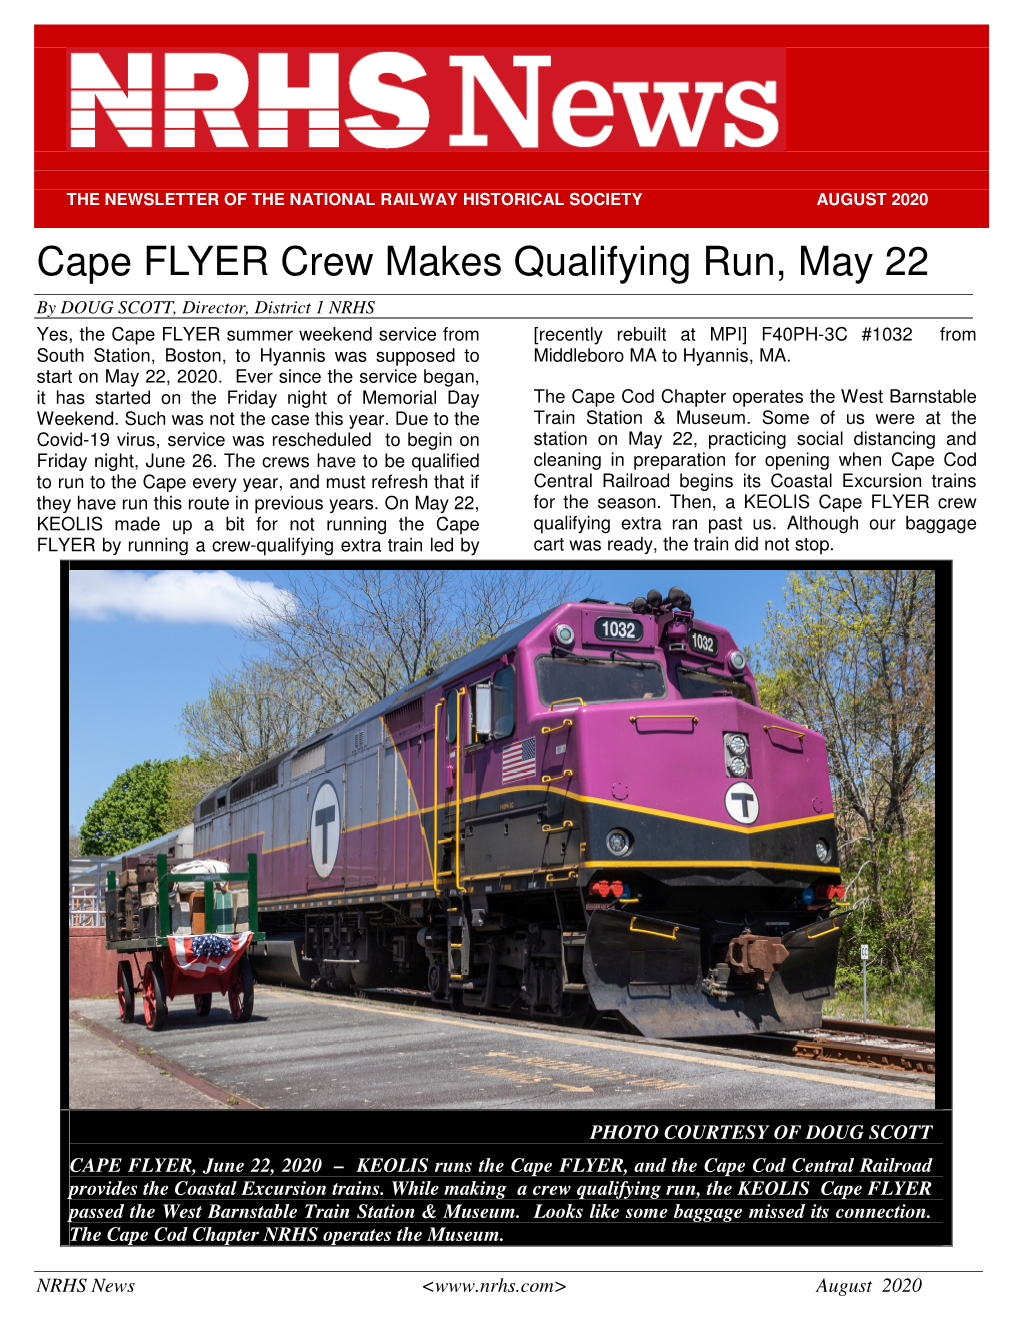 Cape FLYER Crew Makes Qualifying Run, May 22